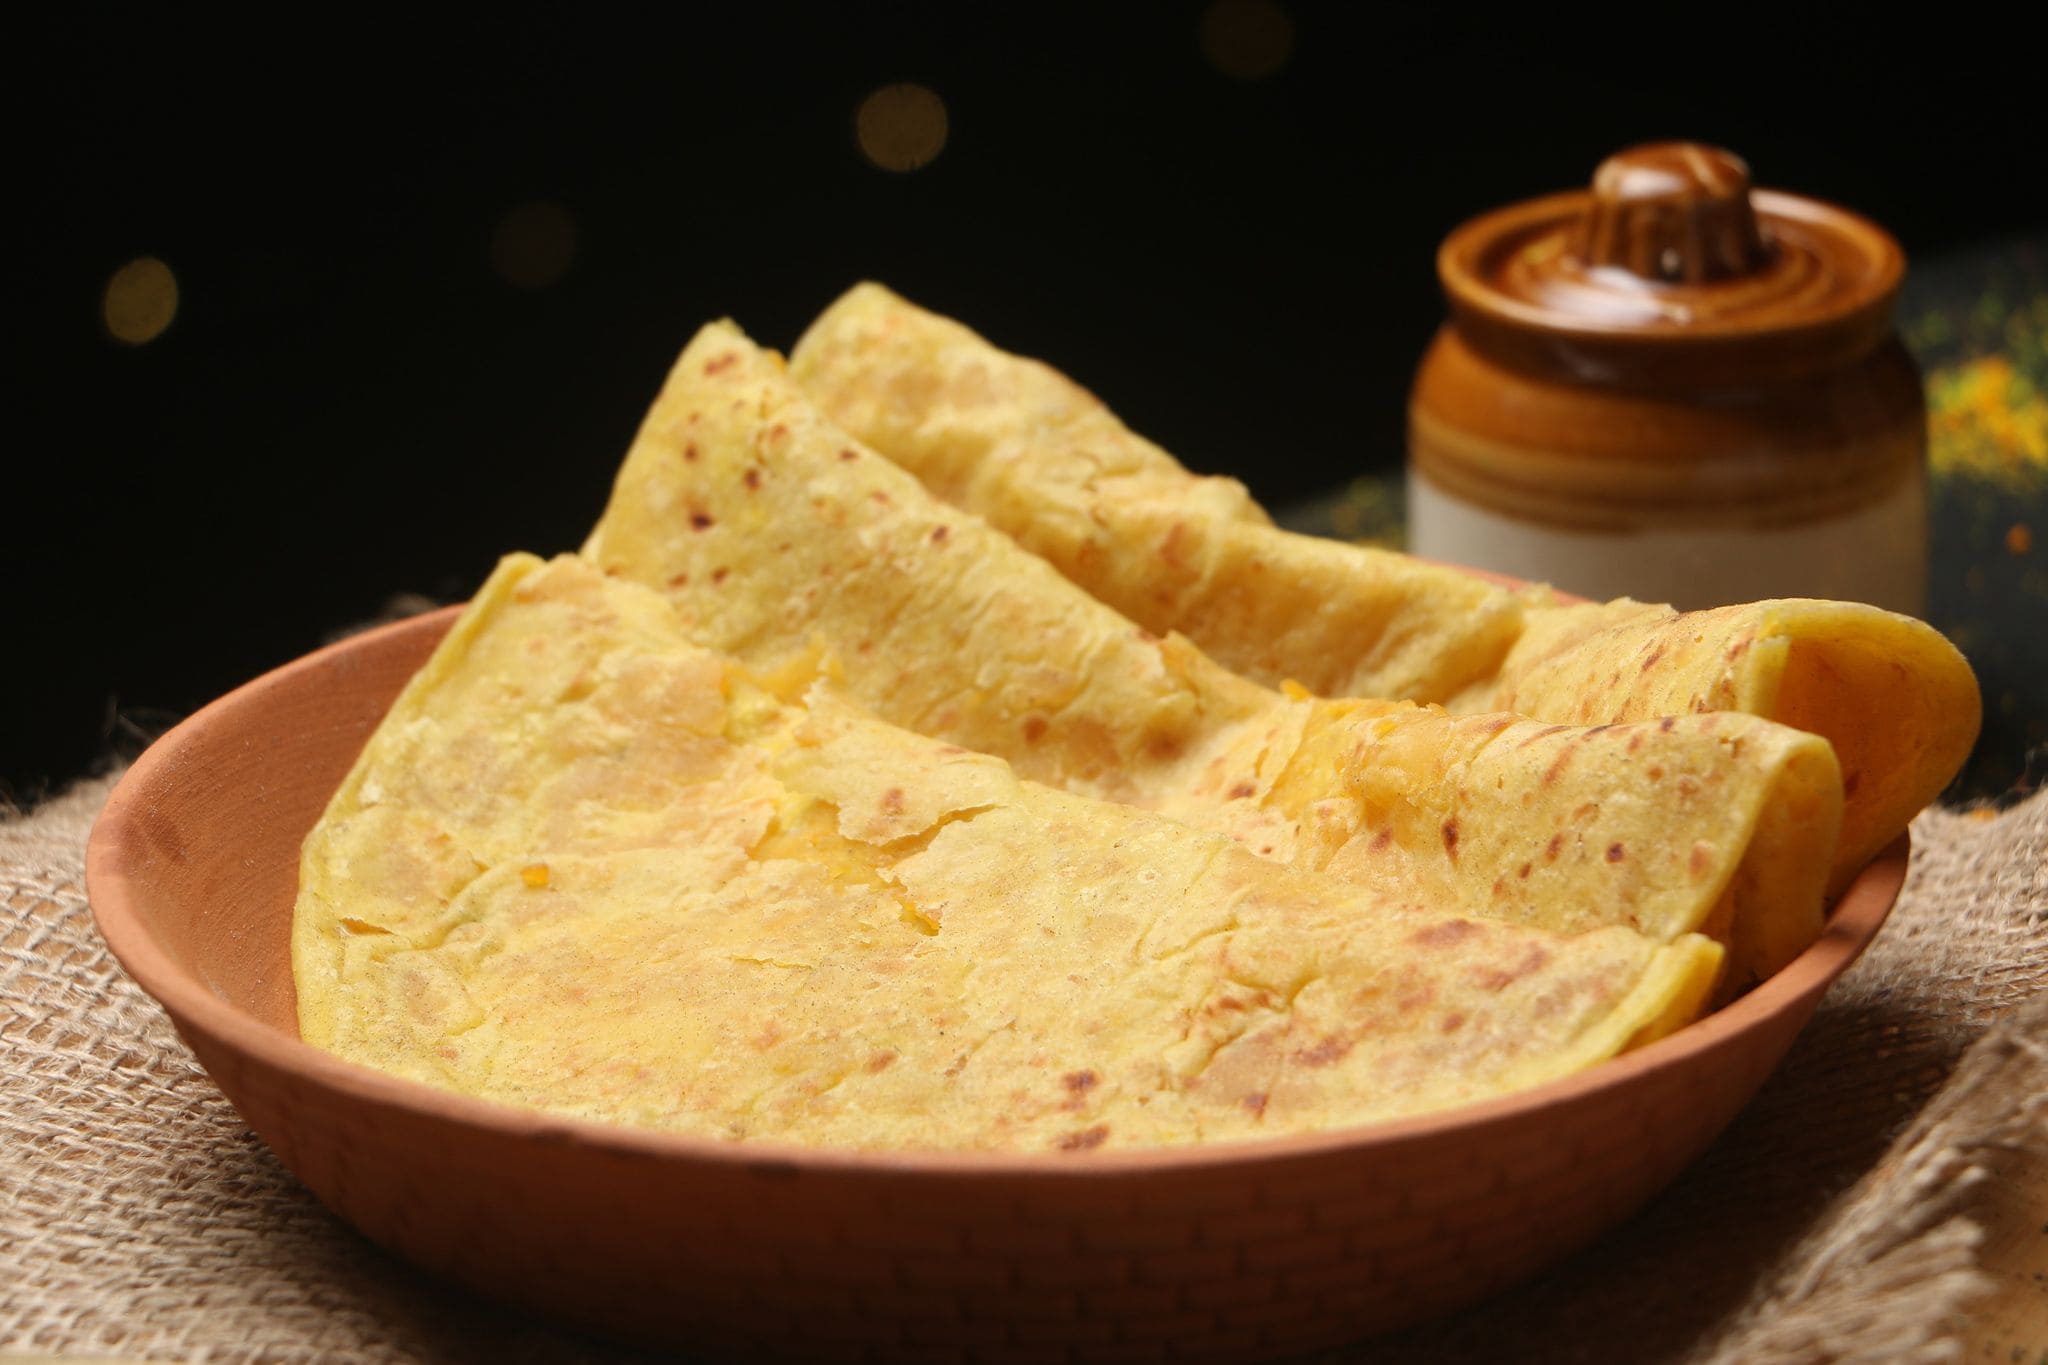 The famous Maharashtrian sweet-dish Puran Poli has which of these as its main ingredient?